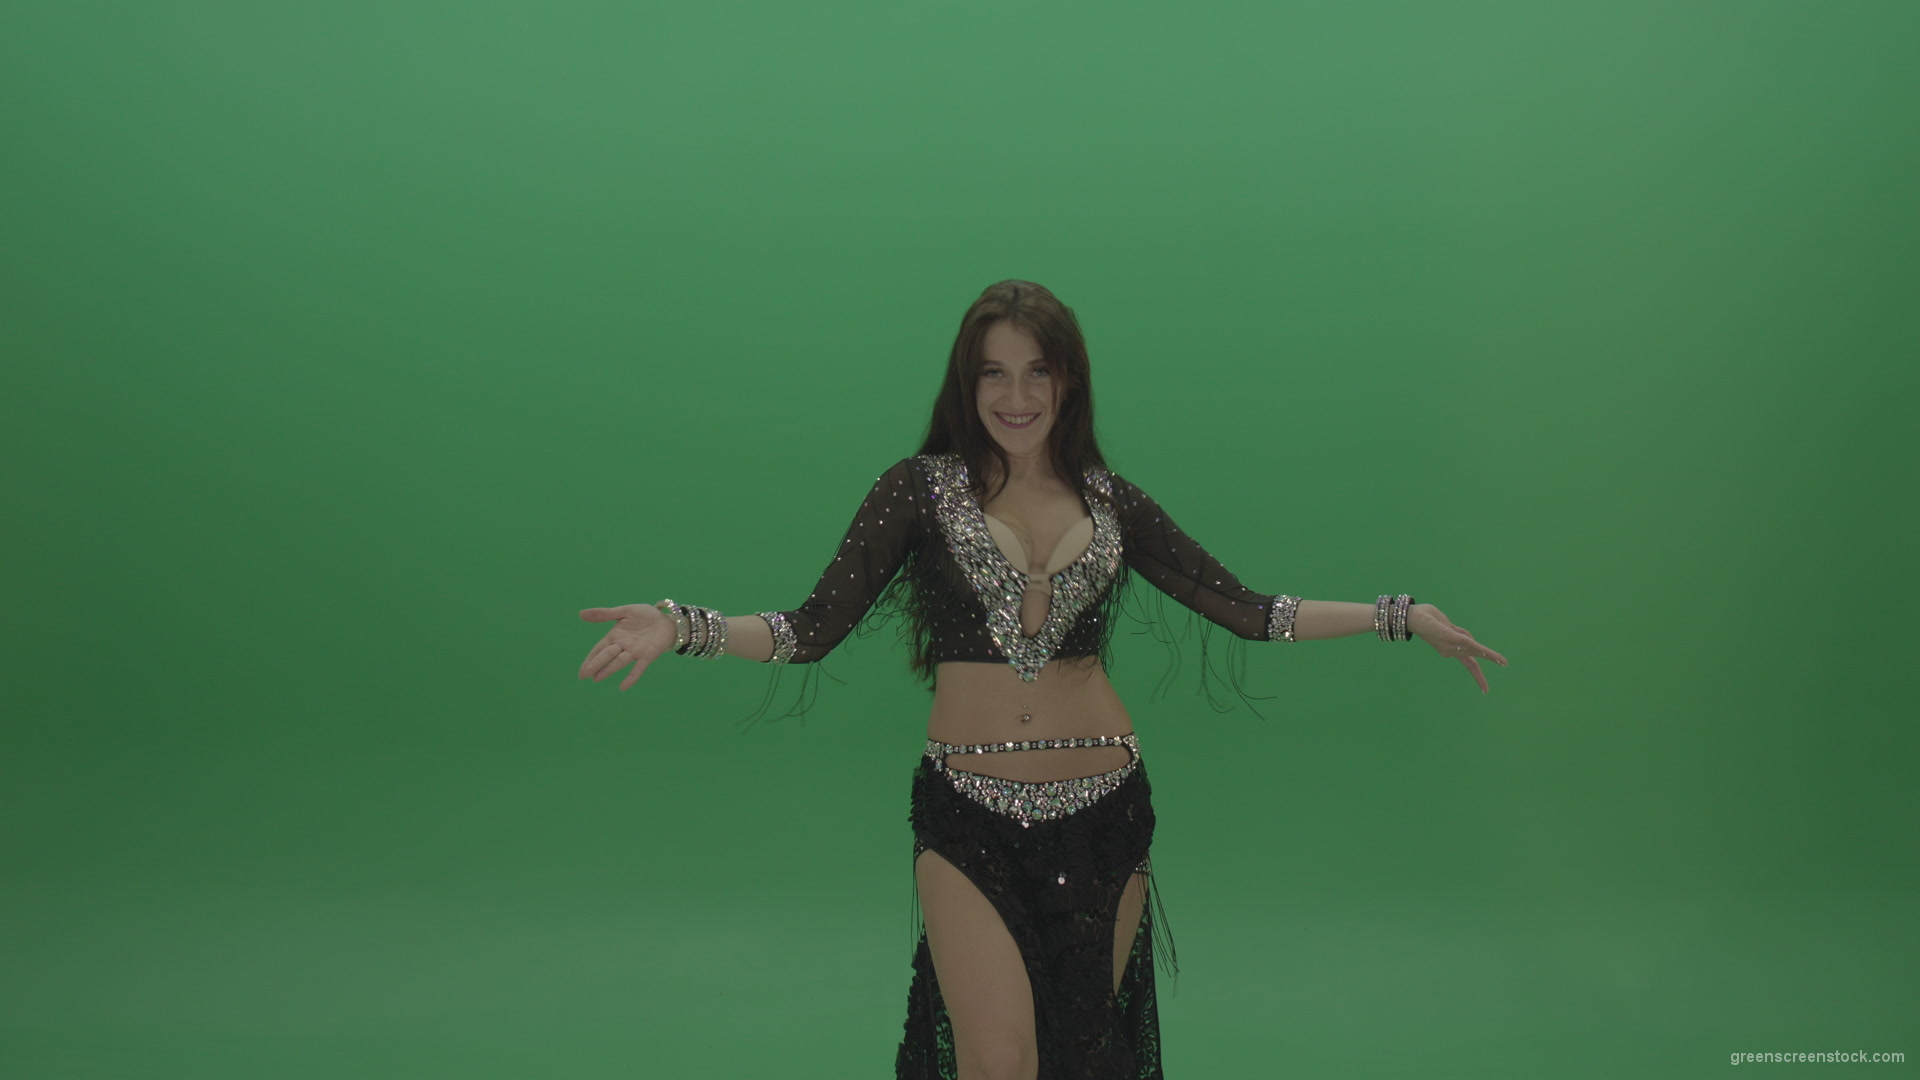 Refined-belly-dancer-in-black-wear-display-amazing-dance-moves-over-chromakey-background_004 Green Screen Stock